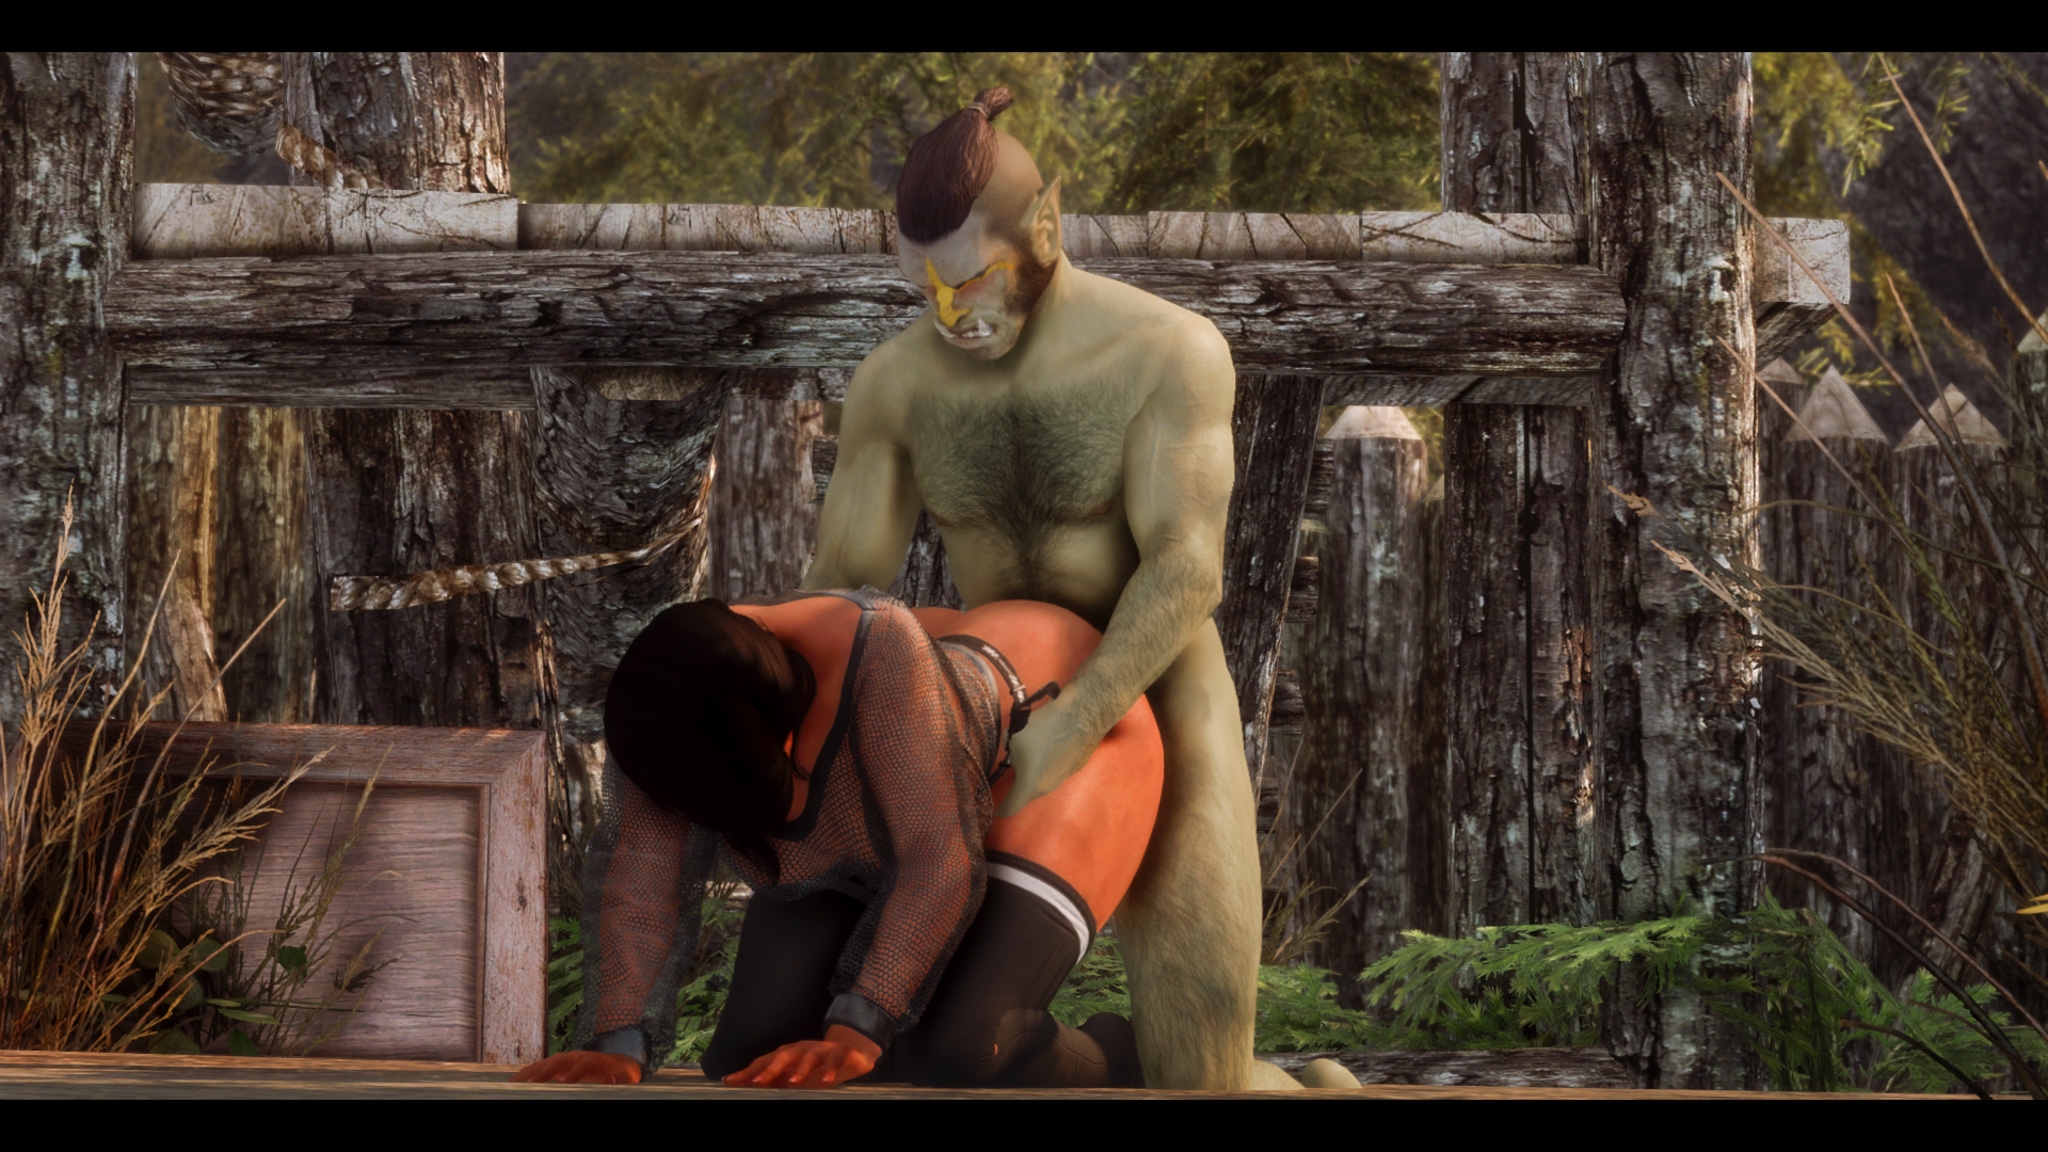 Orc Plows Redguard Skyrim Nsfw Babe Big Tits Tits Bdsm Roleplay Sexy 3d Porn Prostitute Bouncing Boobs Bouncing Tits Pussy Penetration Doggy Style Doggystyle Doggy Style Position Orc 2